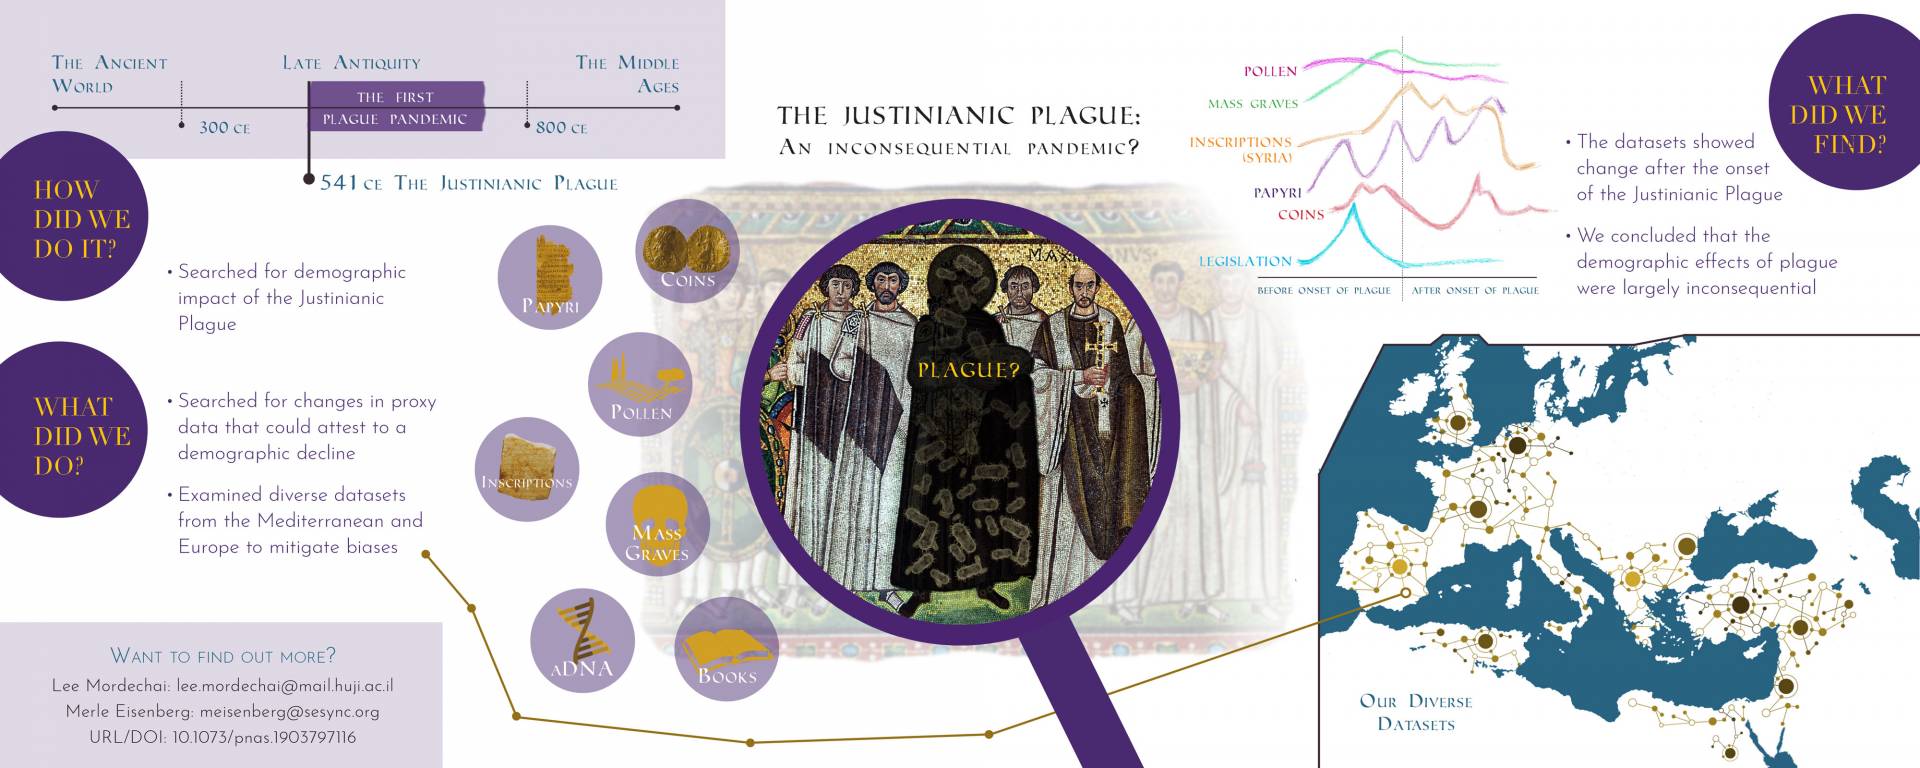 Infographic depicting research on the Bubonic Plague